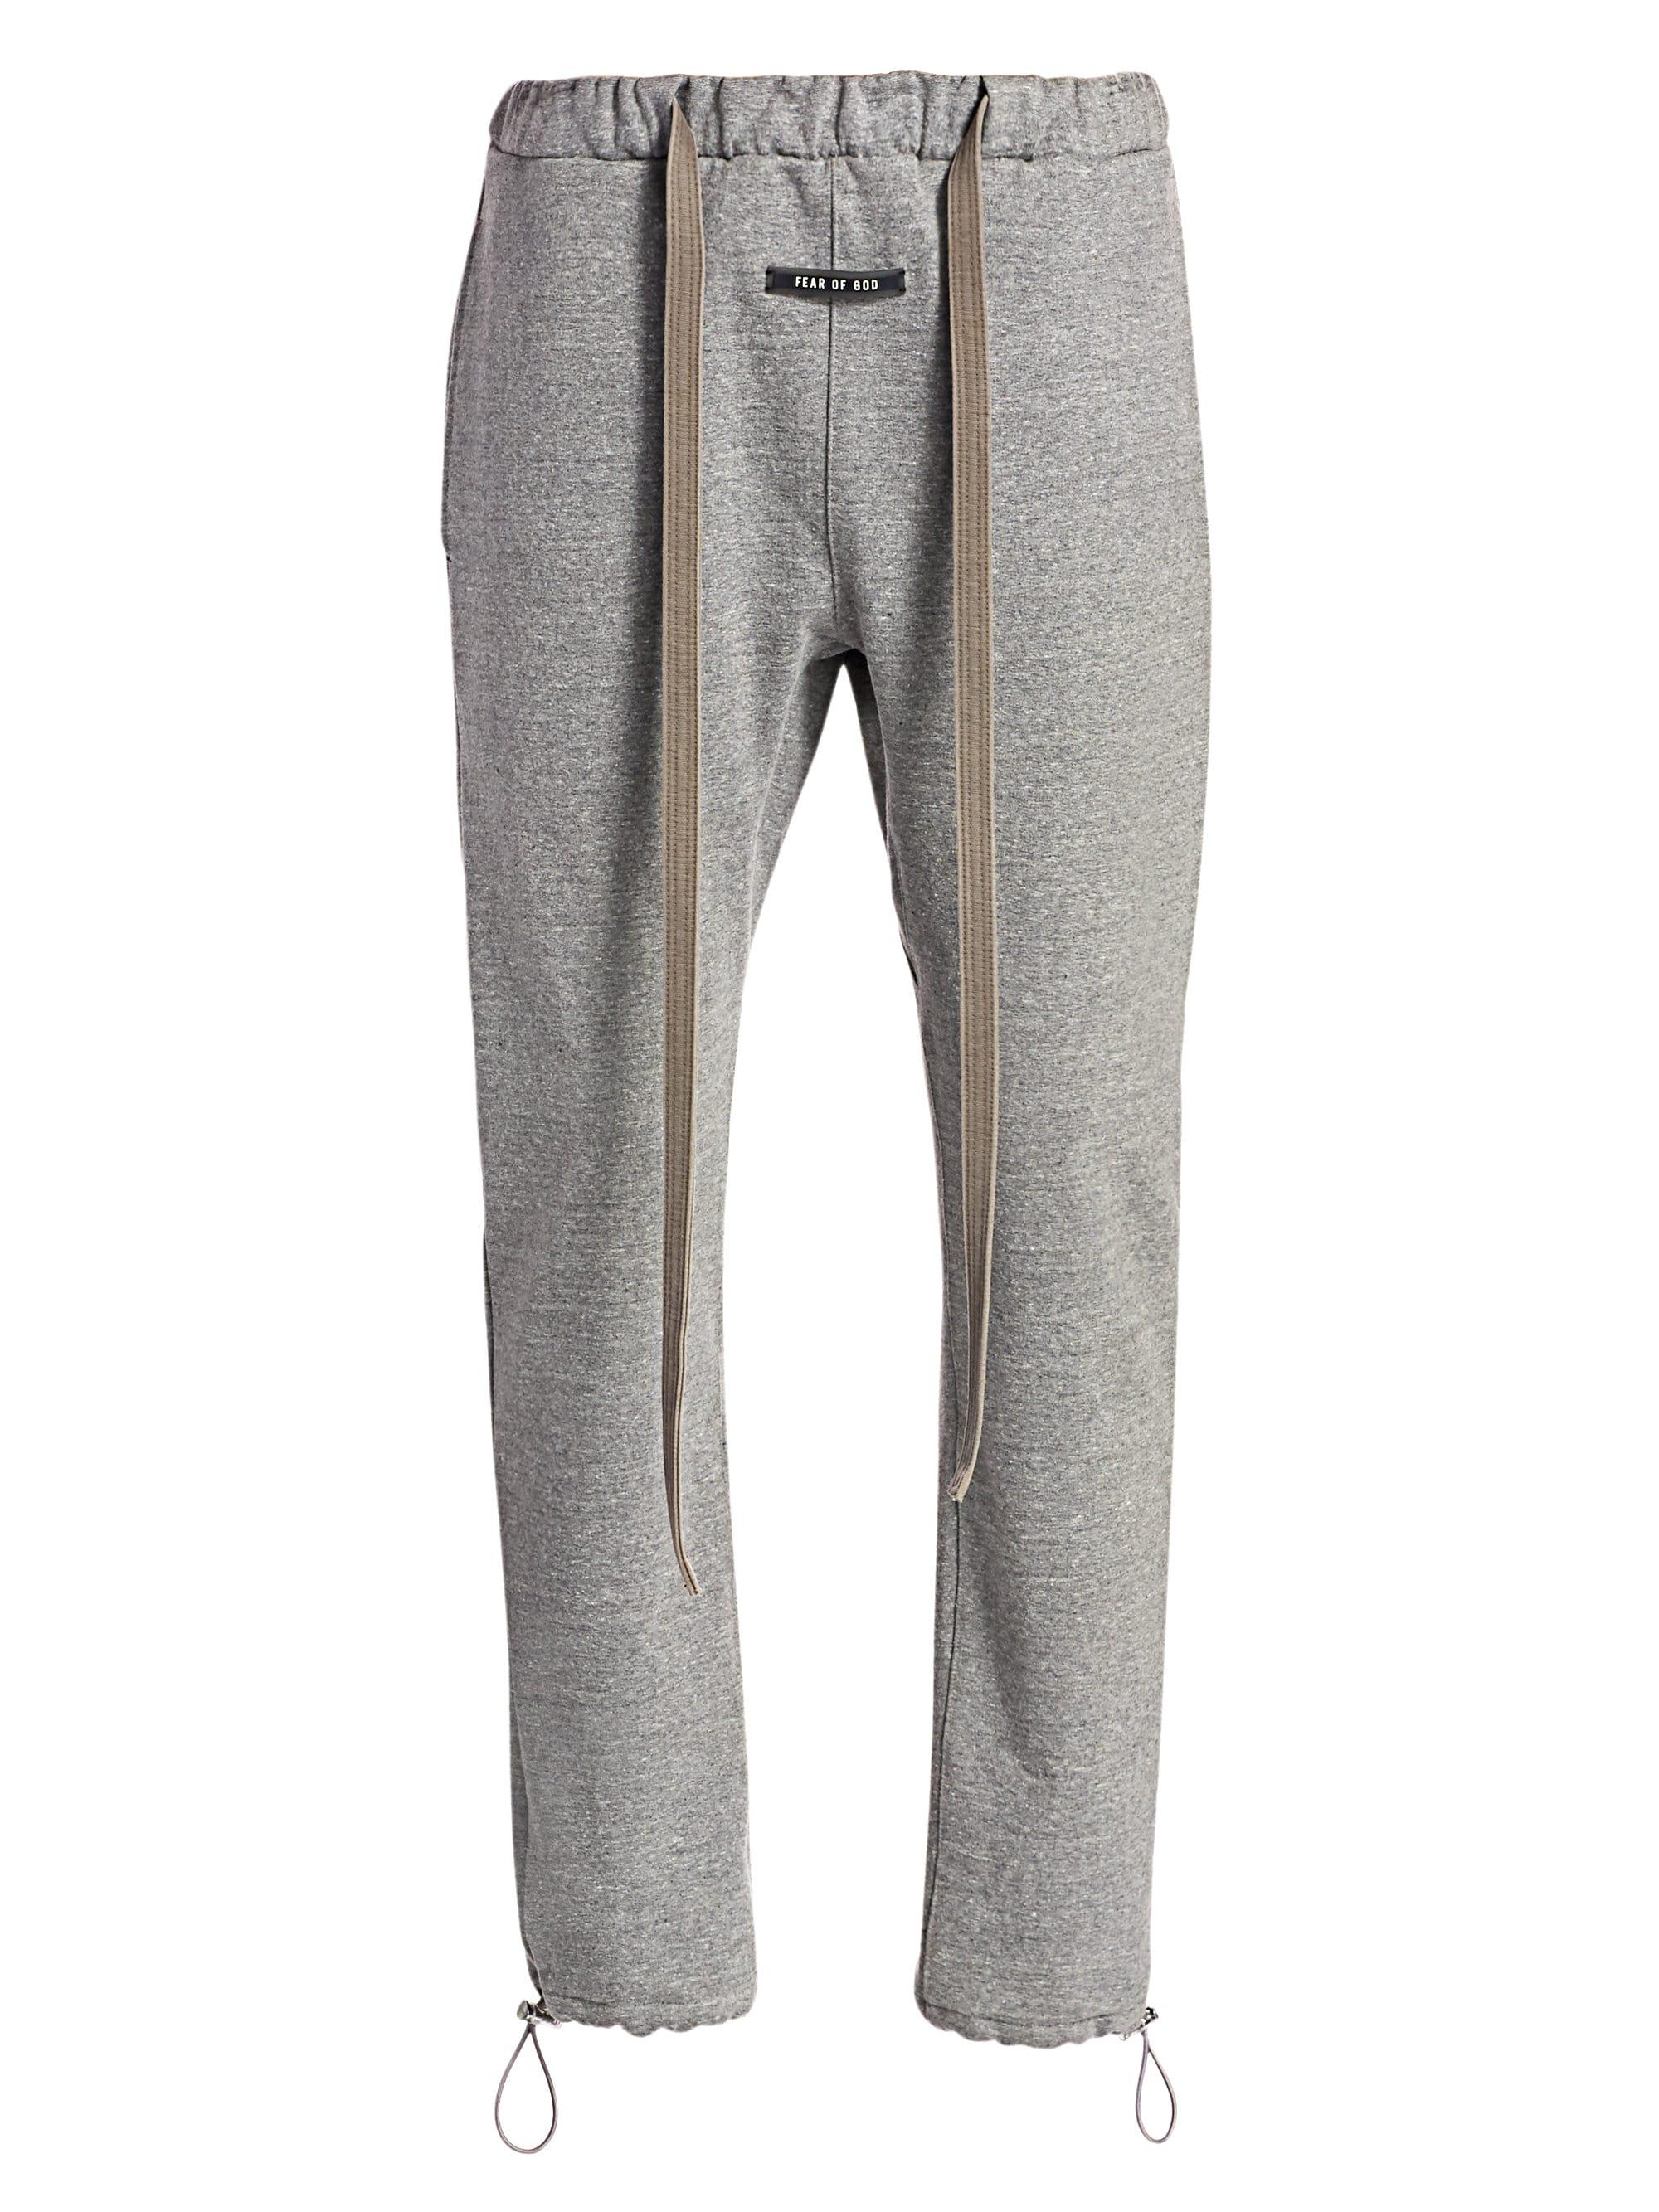 Fear Of God Relaxed Cotton Sweatpants in Heather Grey (Gray) for Men - Lyst